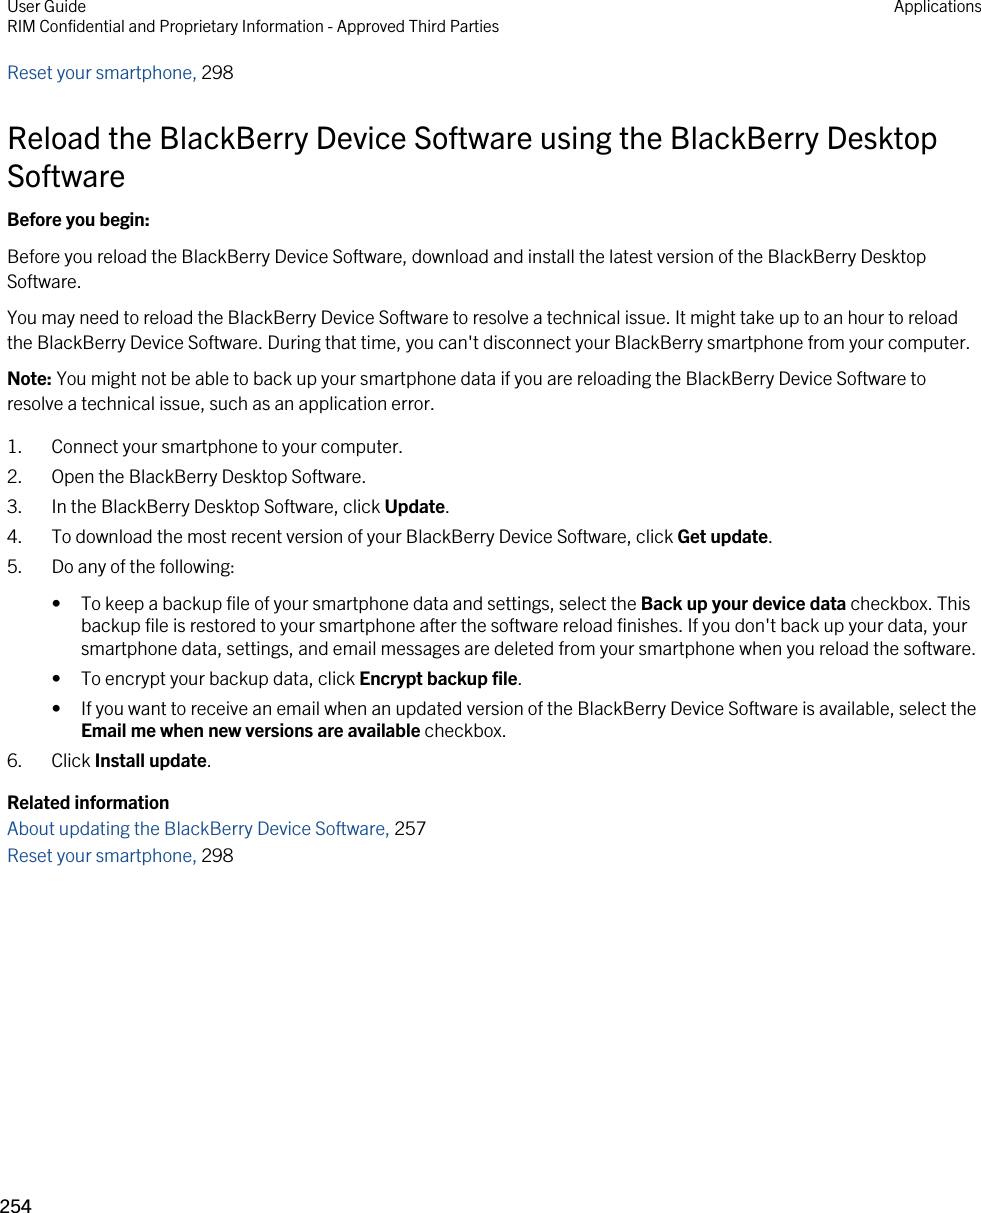 Reset your smartphone, 298Reload the BlackBerry Device Software using the BlackBerry Desktop SoftwareBefore you begin: Before you reload the BlackBerry Device Software, download and install the latest version of the BlackBerry Desktop Software.You may need to reload the BlackBerry Device Software to resolve a technical issue. It might take up to an hour to reload the BlackBerry Device Software. During that time, you can&apos;t disconnect your BlackBerry smartphone from your computer.Note: You might not be able to back up your smartphone data if you are reloading the BlackBerry Device Software to resolve a technical issue, such as an application error.1. Connect your smartphone to your computer.2. Open the BlackBerry Desktop Software.3. In the BlackBerry Desktop Software, click Update.4. To download the most recent version of your BlackBerry Device Software, click Get update.5. Do any of the following:• To keep a backup file of your smartphone data and settings, select the Back up your device data checkbox. This backup file is restored to your smartphone after the software reload finishes. If you don&apos;t back up your data, your smartphone data, settings, and email messages are deleted from your smartphone when you reload the software.• To encrypt your backup data, click Encrypt backup file.• If you want to receive an email when an updated version of the BlackBerry Device Software is available, select the Email me when new versions are available checkbox.6. Click Install update.Related informationAbout updating the BlackBerry Device Software, 257Reset your smartphone, 298User GuideRIM Confidential and Proprietary Information - Approved Third Parties Applications254 